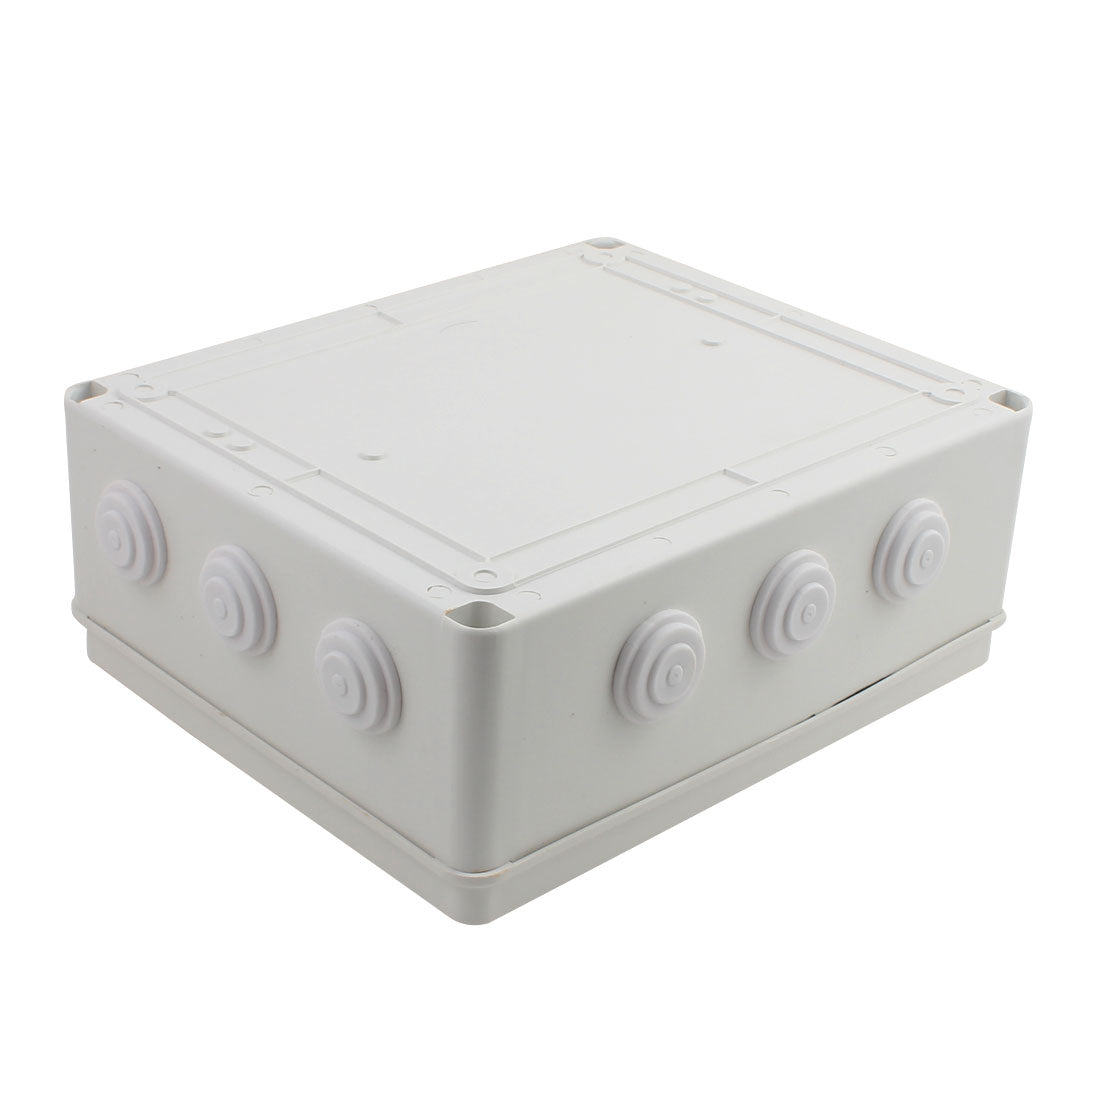 uxcell Uxcell 300mmx250mmx120mm Dustproof IP65 Junction Box Universal Electric Project Enclosure